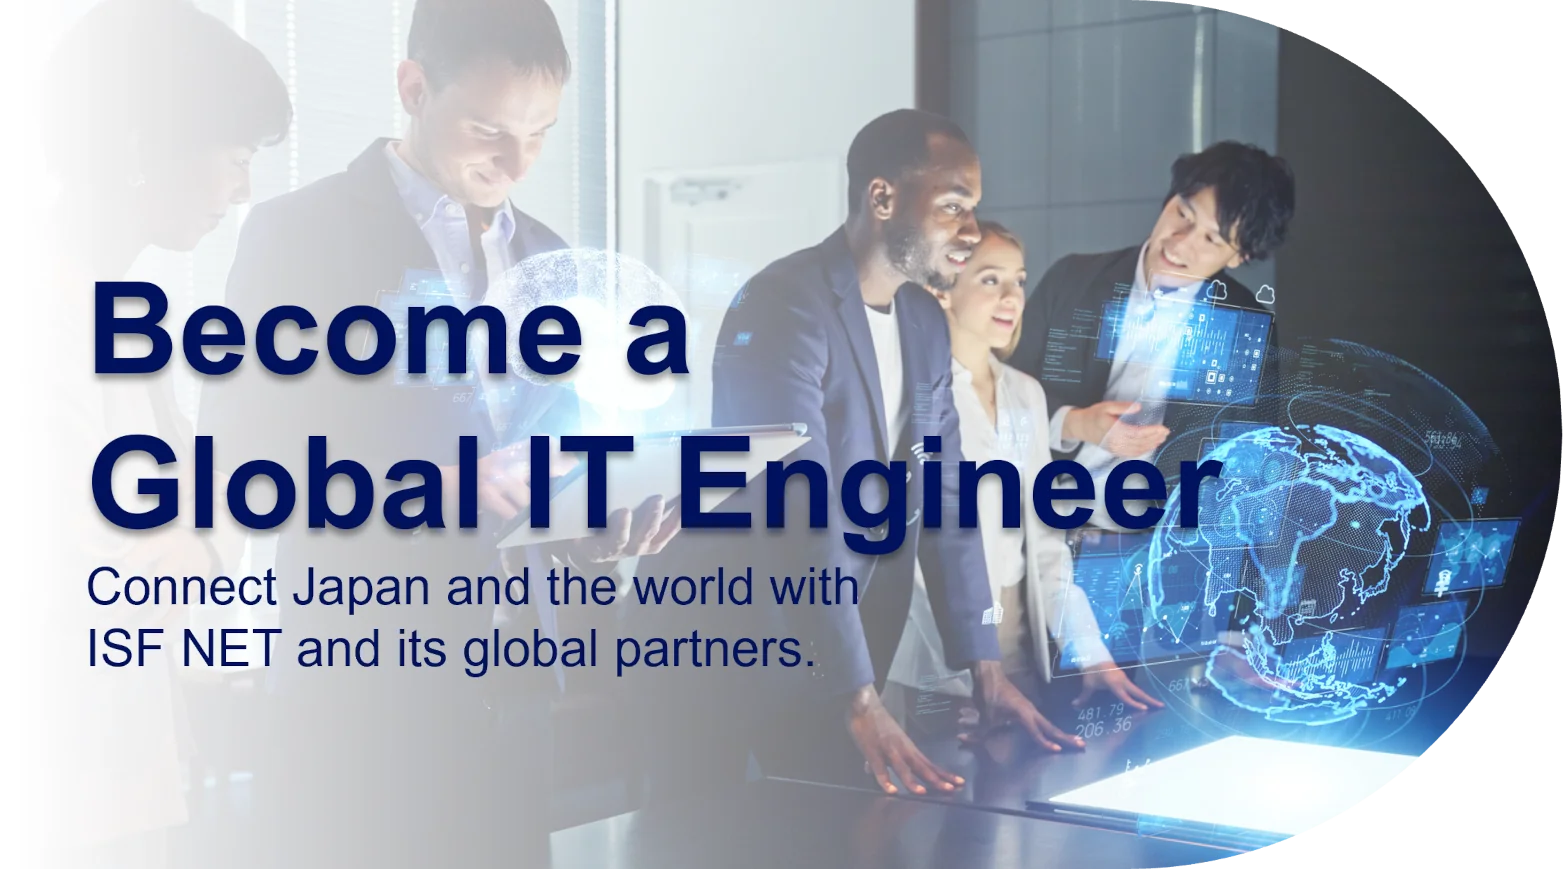 Become a Global IT Engineer